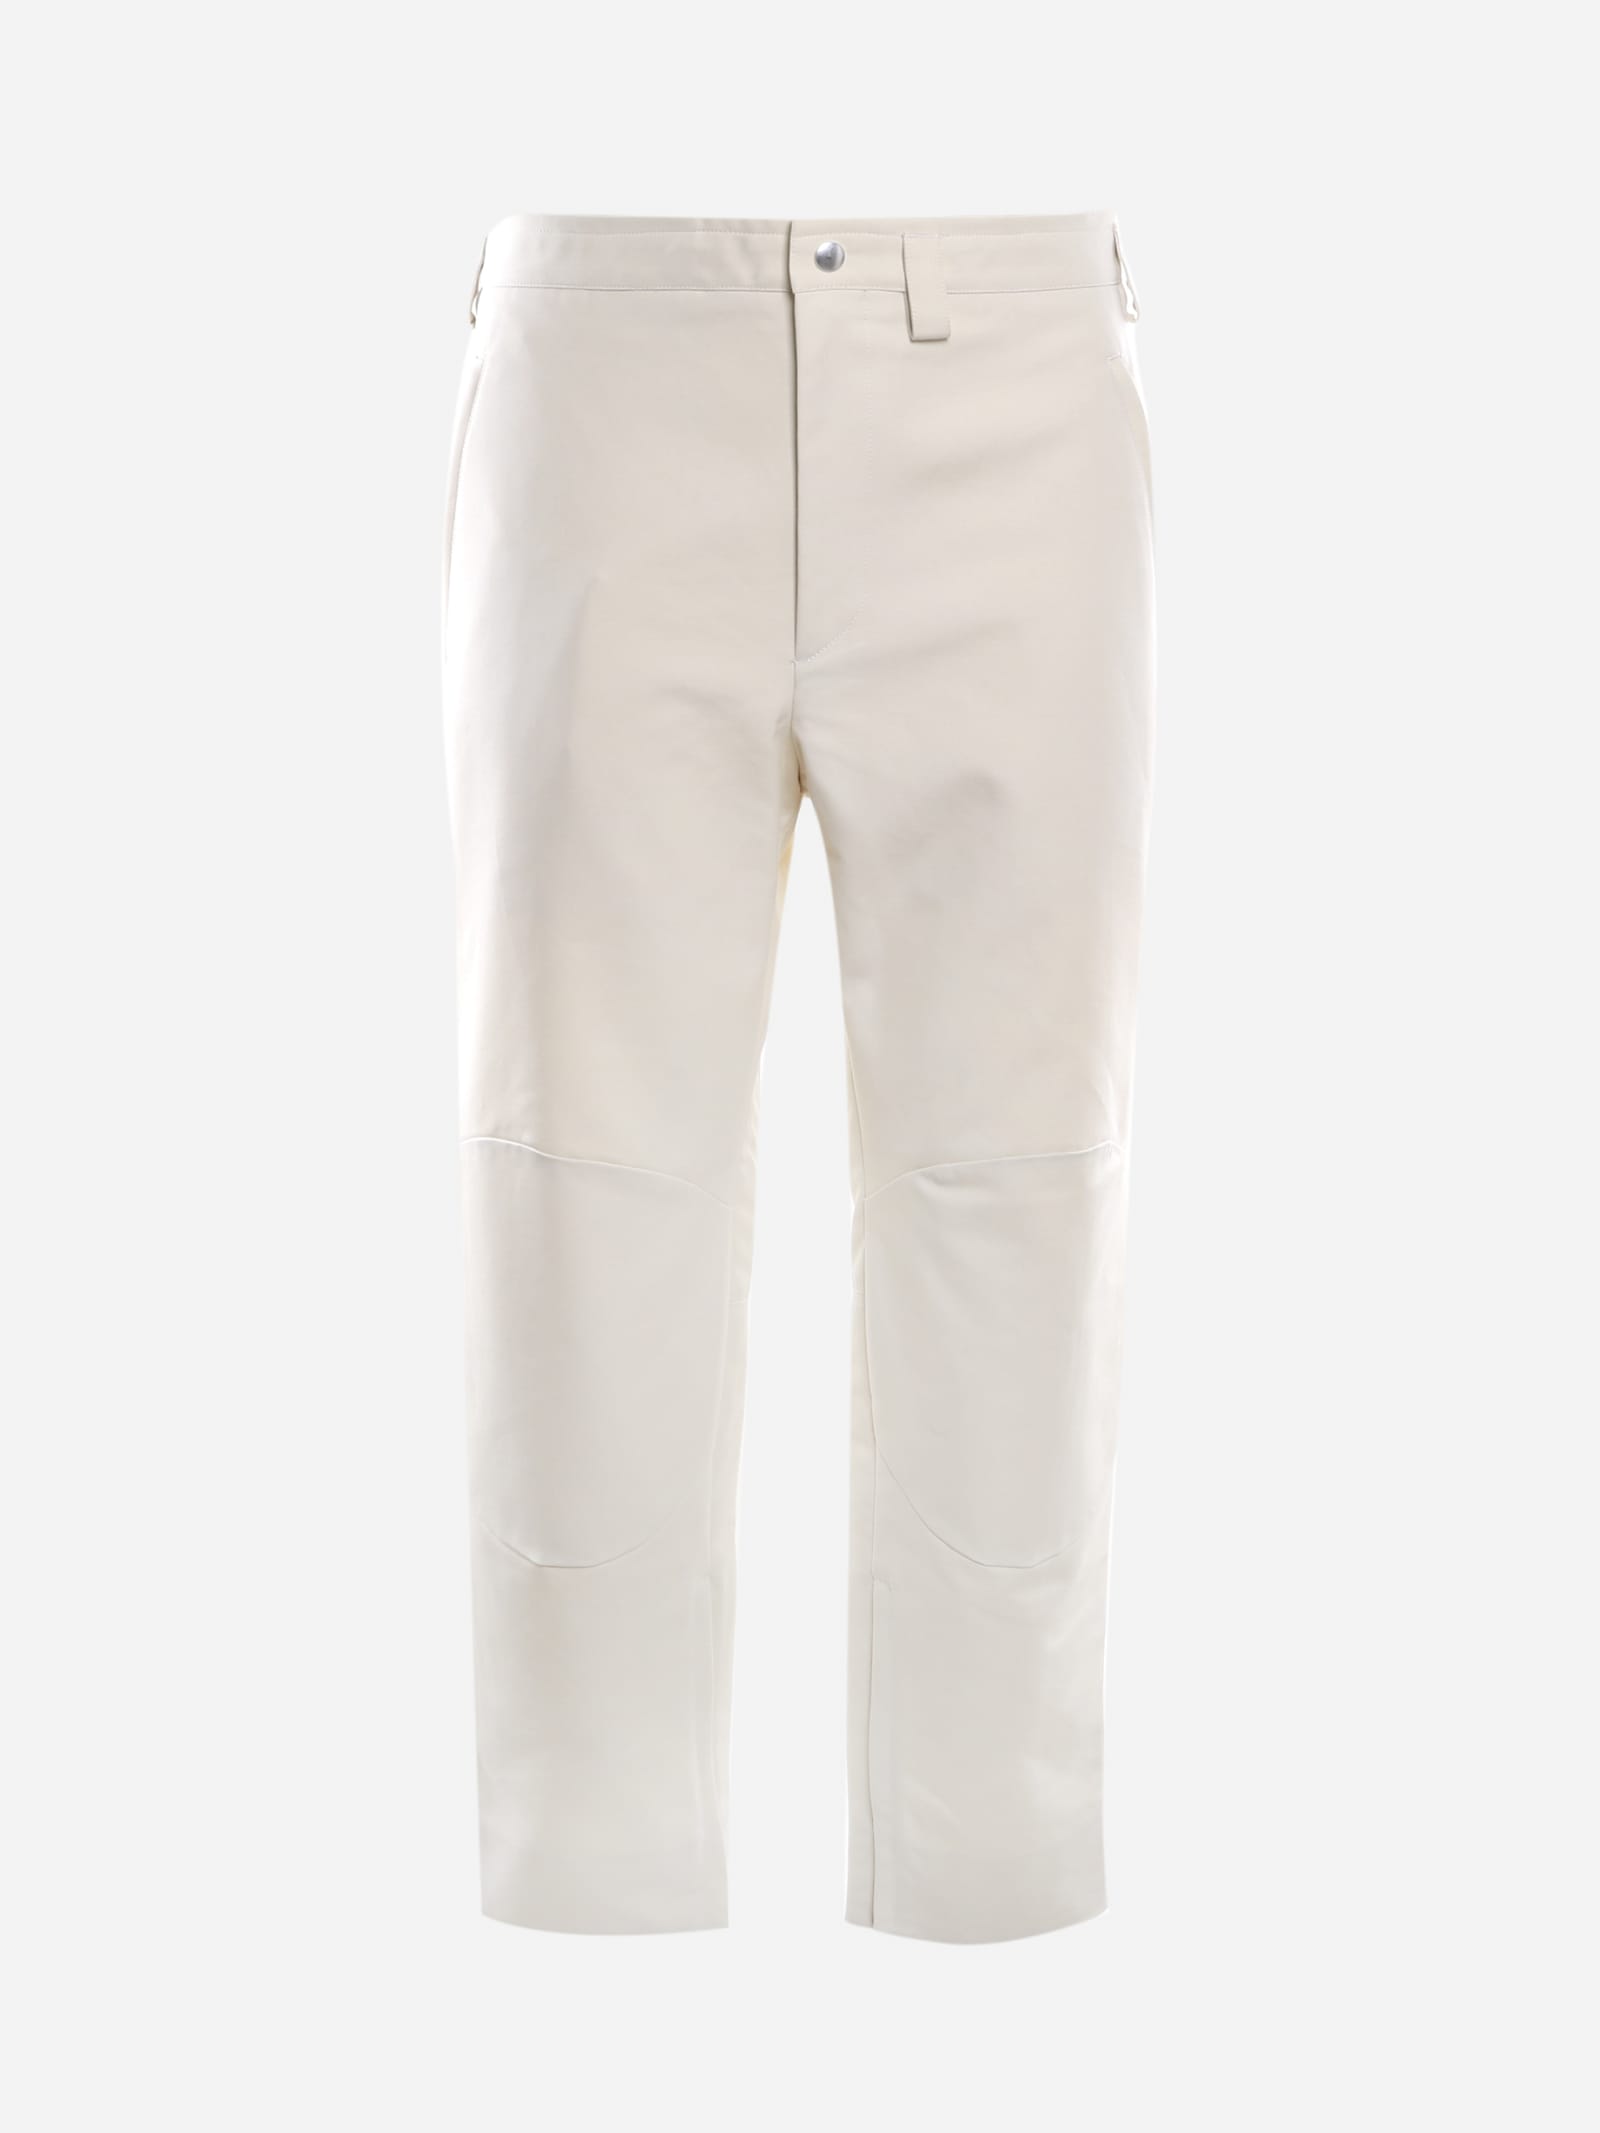 Jil Sander Cotton Trousers With Zip At The Ankles